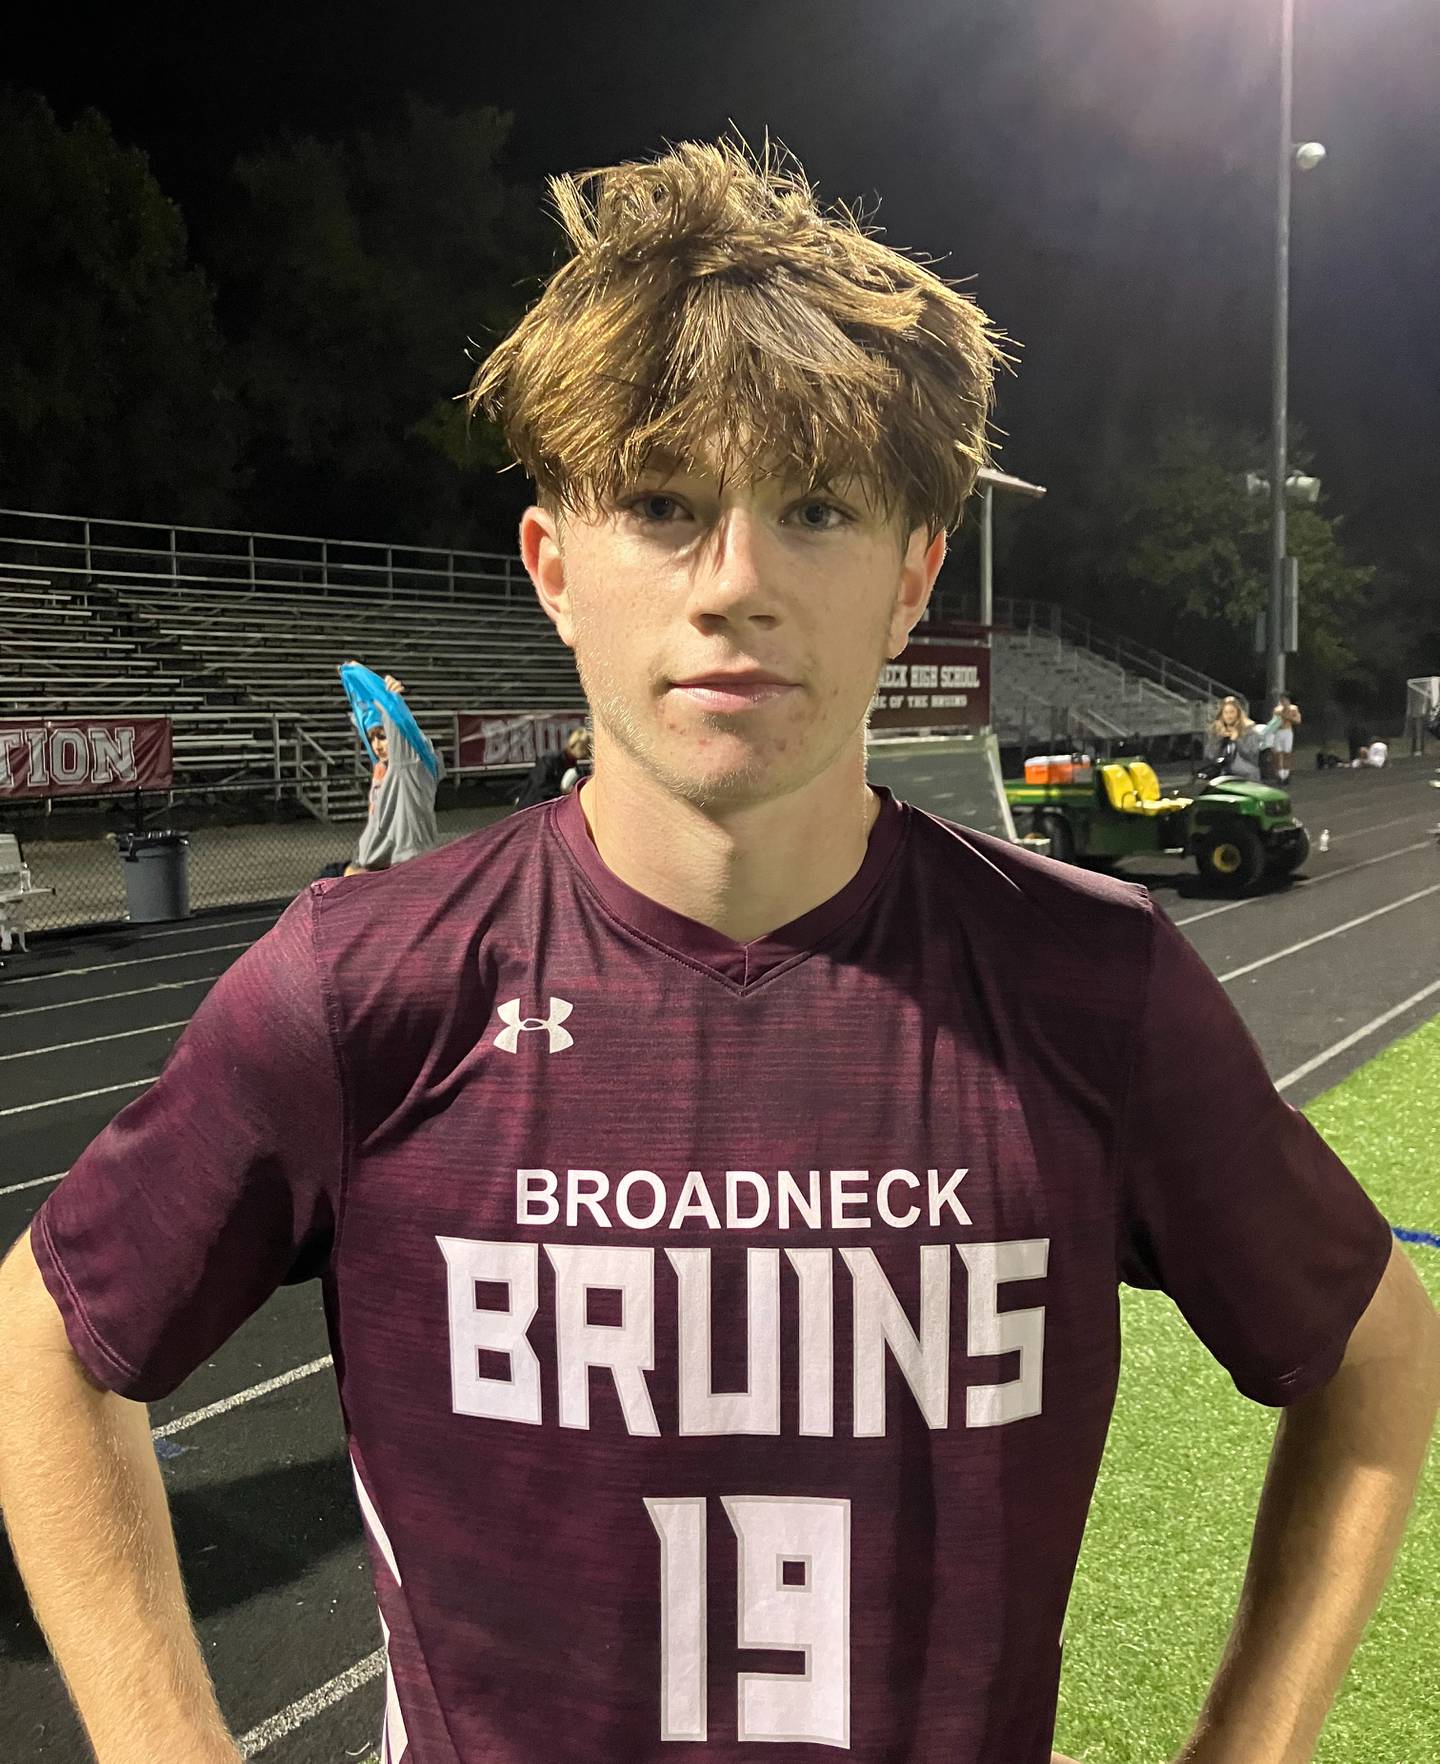 Harlan Welsh was the offense for Broadneck boys soccer Thursday evening, scoring both goals in the No. 6 Bruins' 2-1 victory over previously undefeated and fifth-ranked Severna Park in Anne Arundel County.